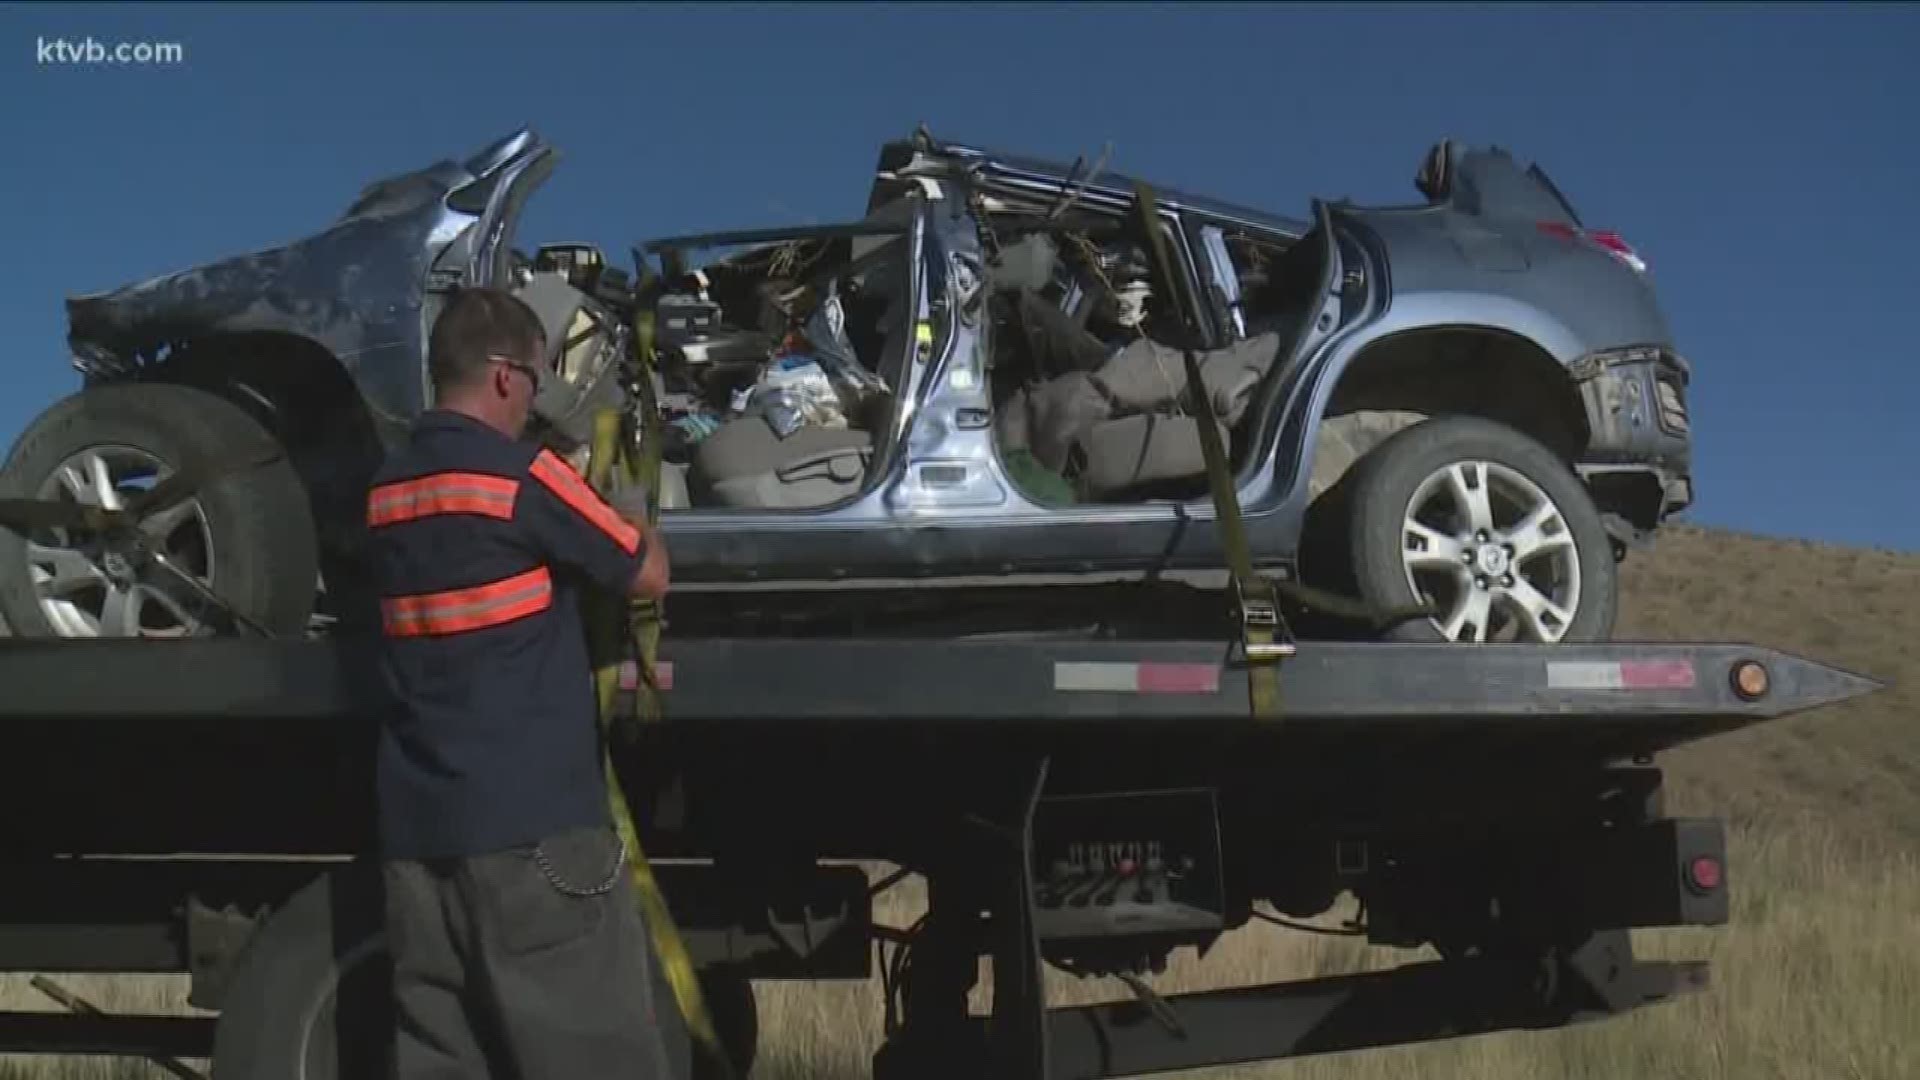 Idaho State Police say two people died and another person was seriously injured in a two-vehicle crash on Highway 21, near Hilltop Station. An Idaho State Police trooper confirmed the two deaths to KTVB crews at the scene.